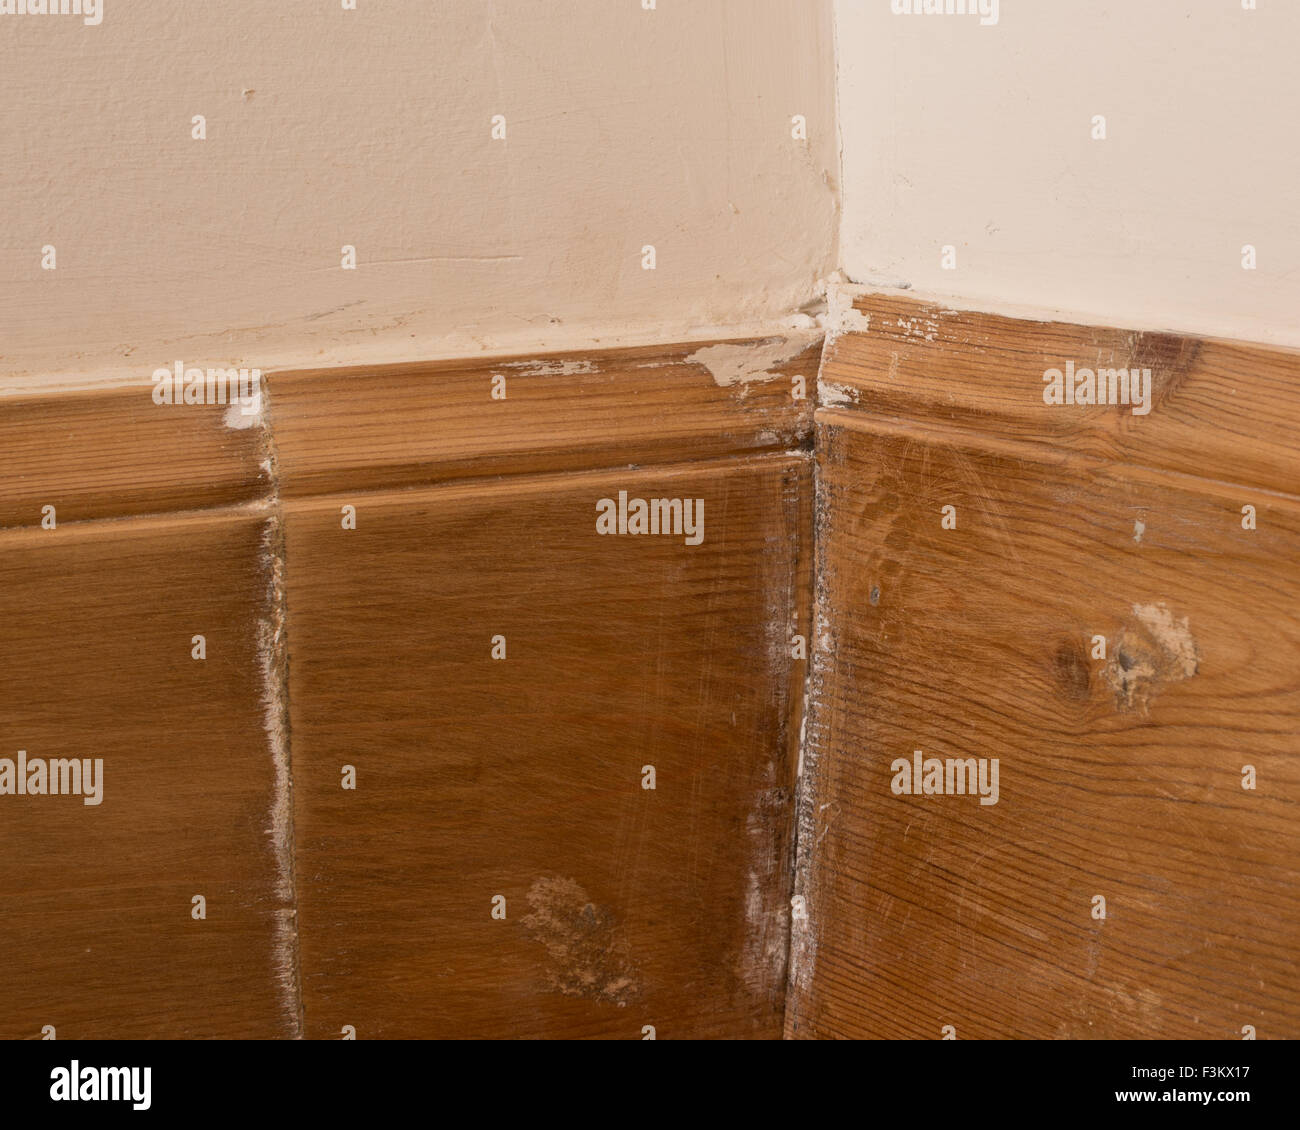 Poor diy workmanship - badly fitted wooden skirting boards with butted joints Stock Photo